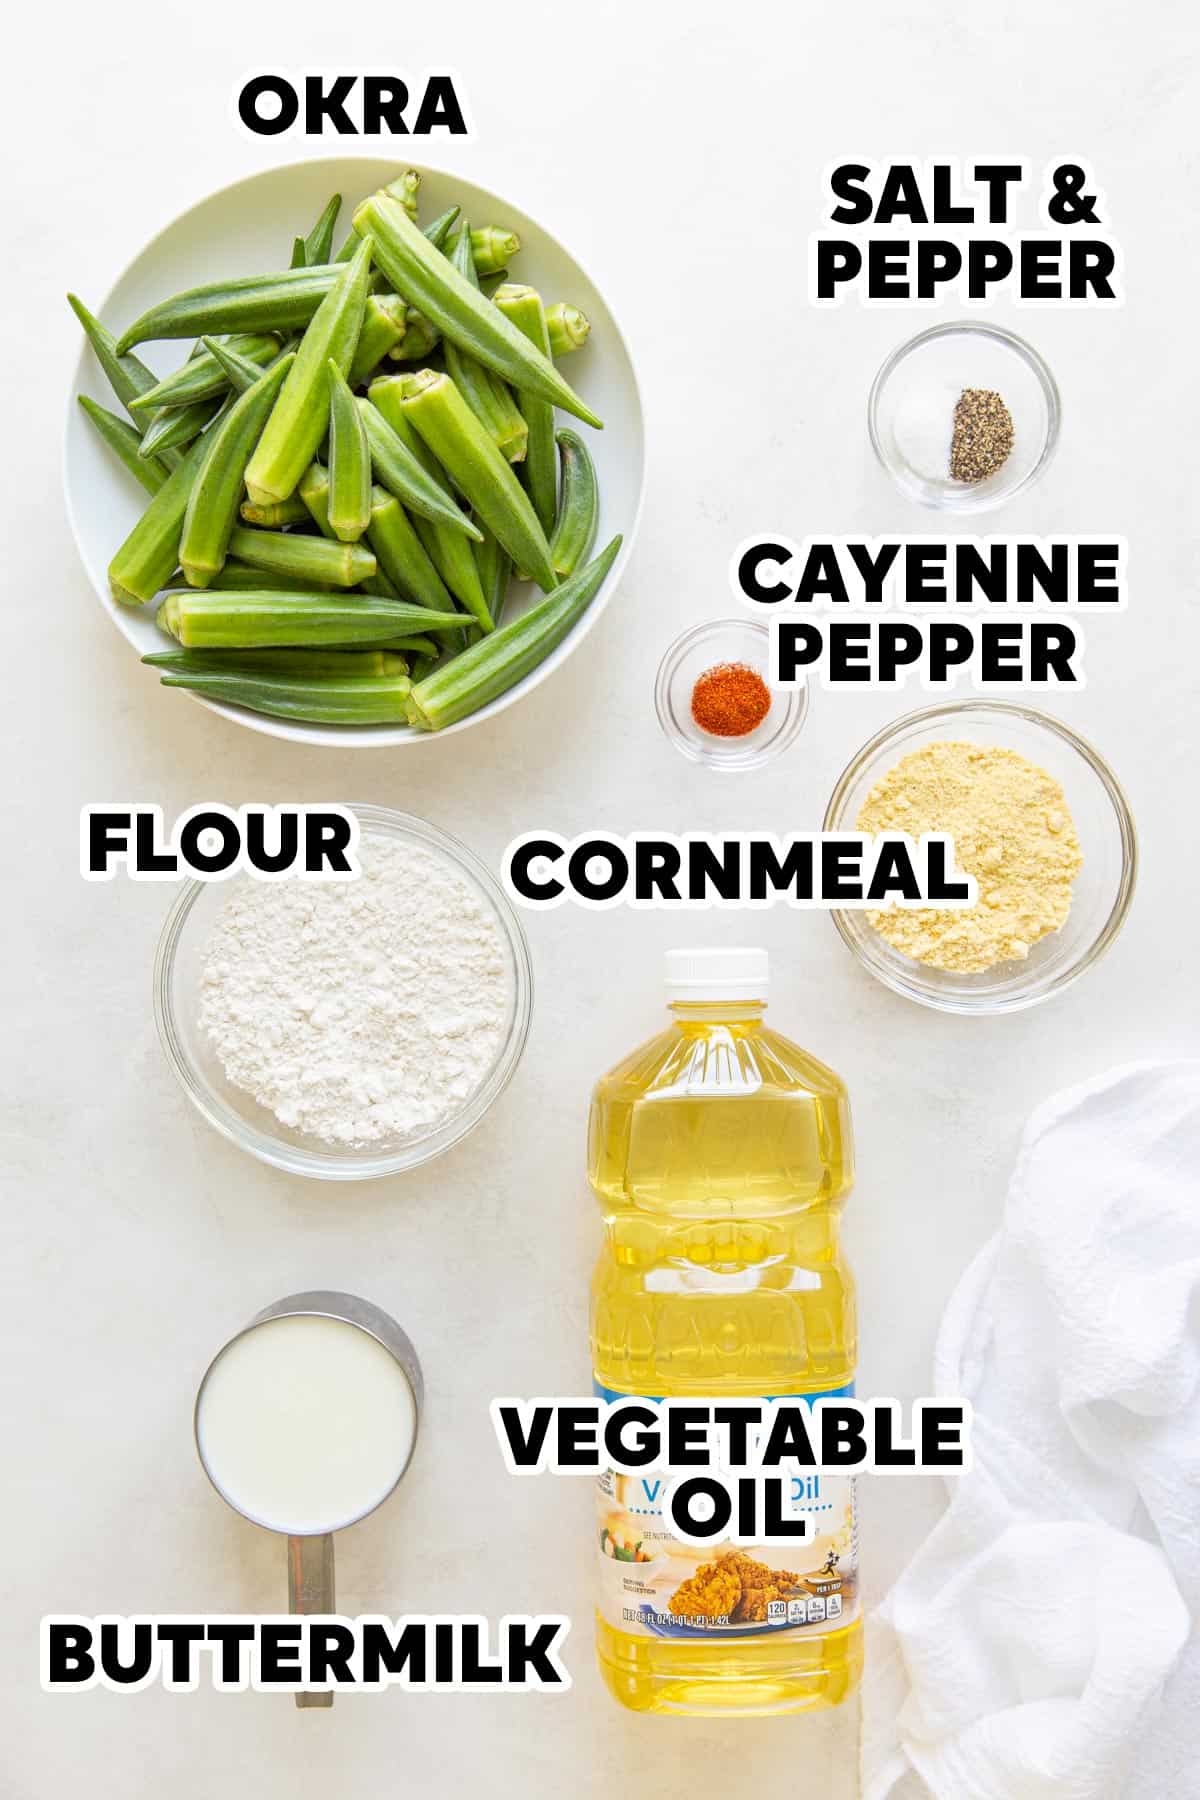 Ingredients for making fried okra with overlay text.